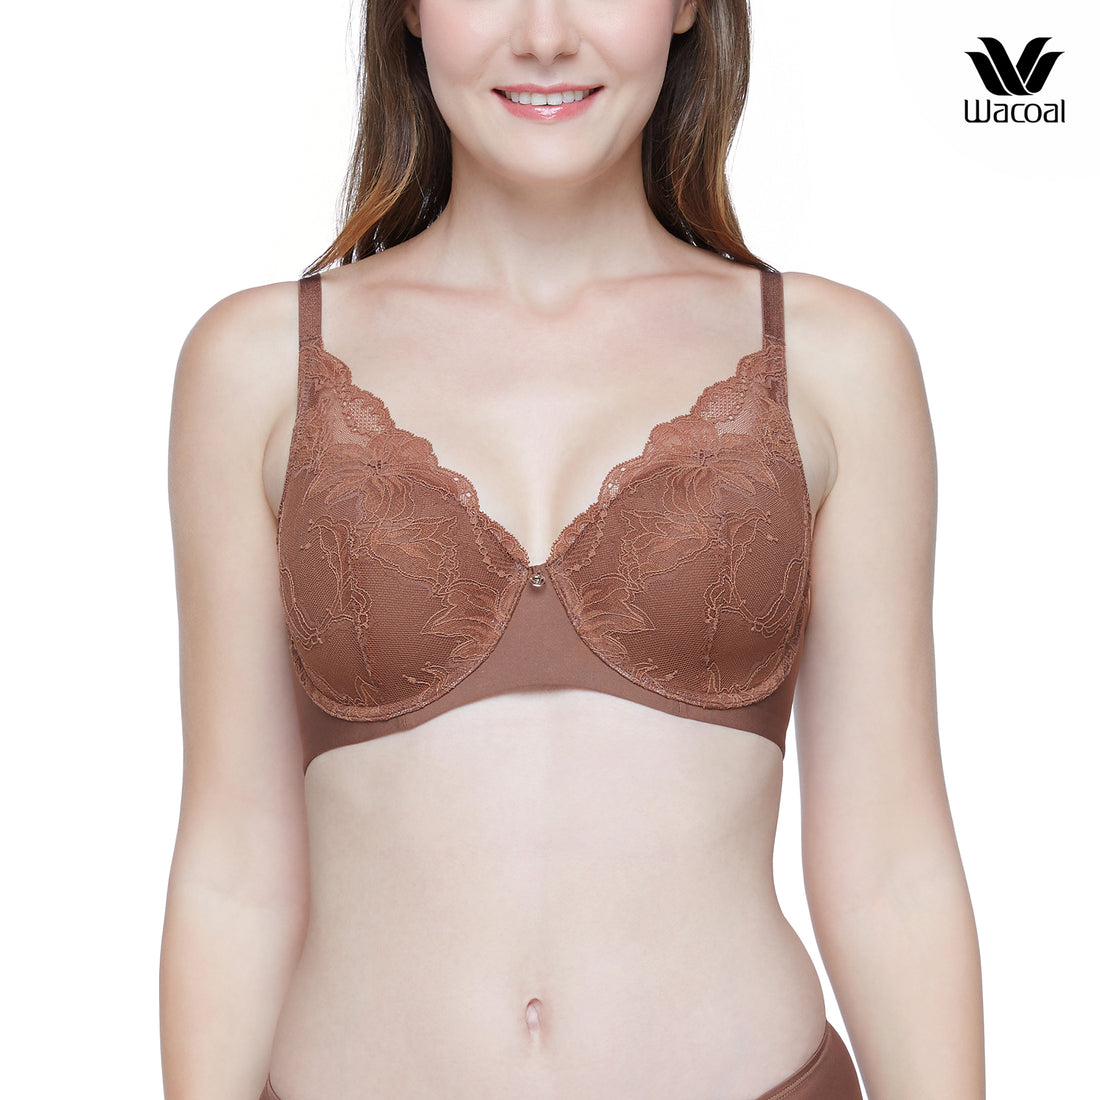 Wacoal Curve Diva, compression bra, large cup girls (bra and panties), model WB7985+MU7985, brown (BR)